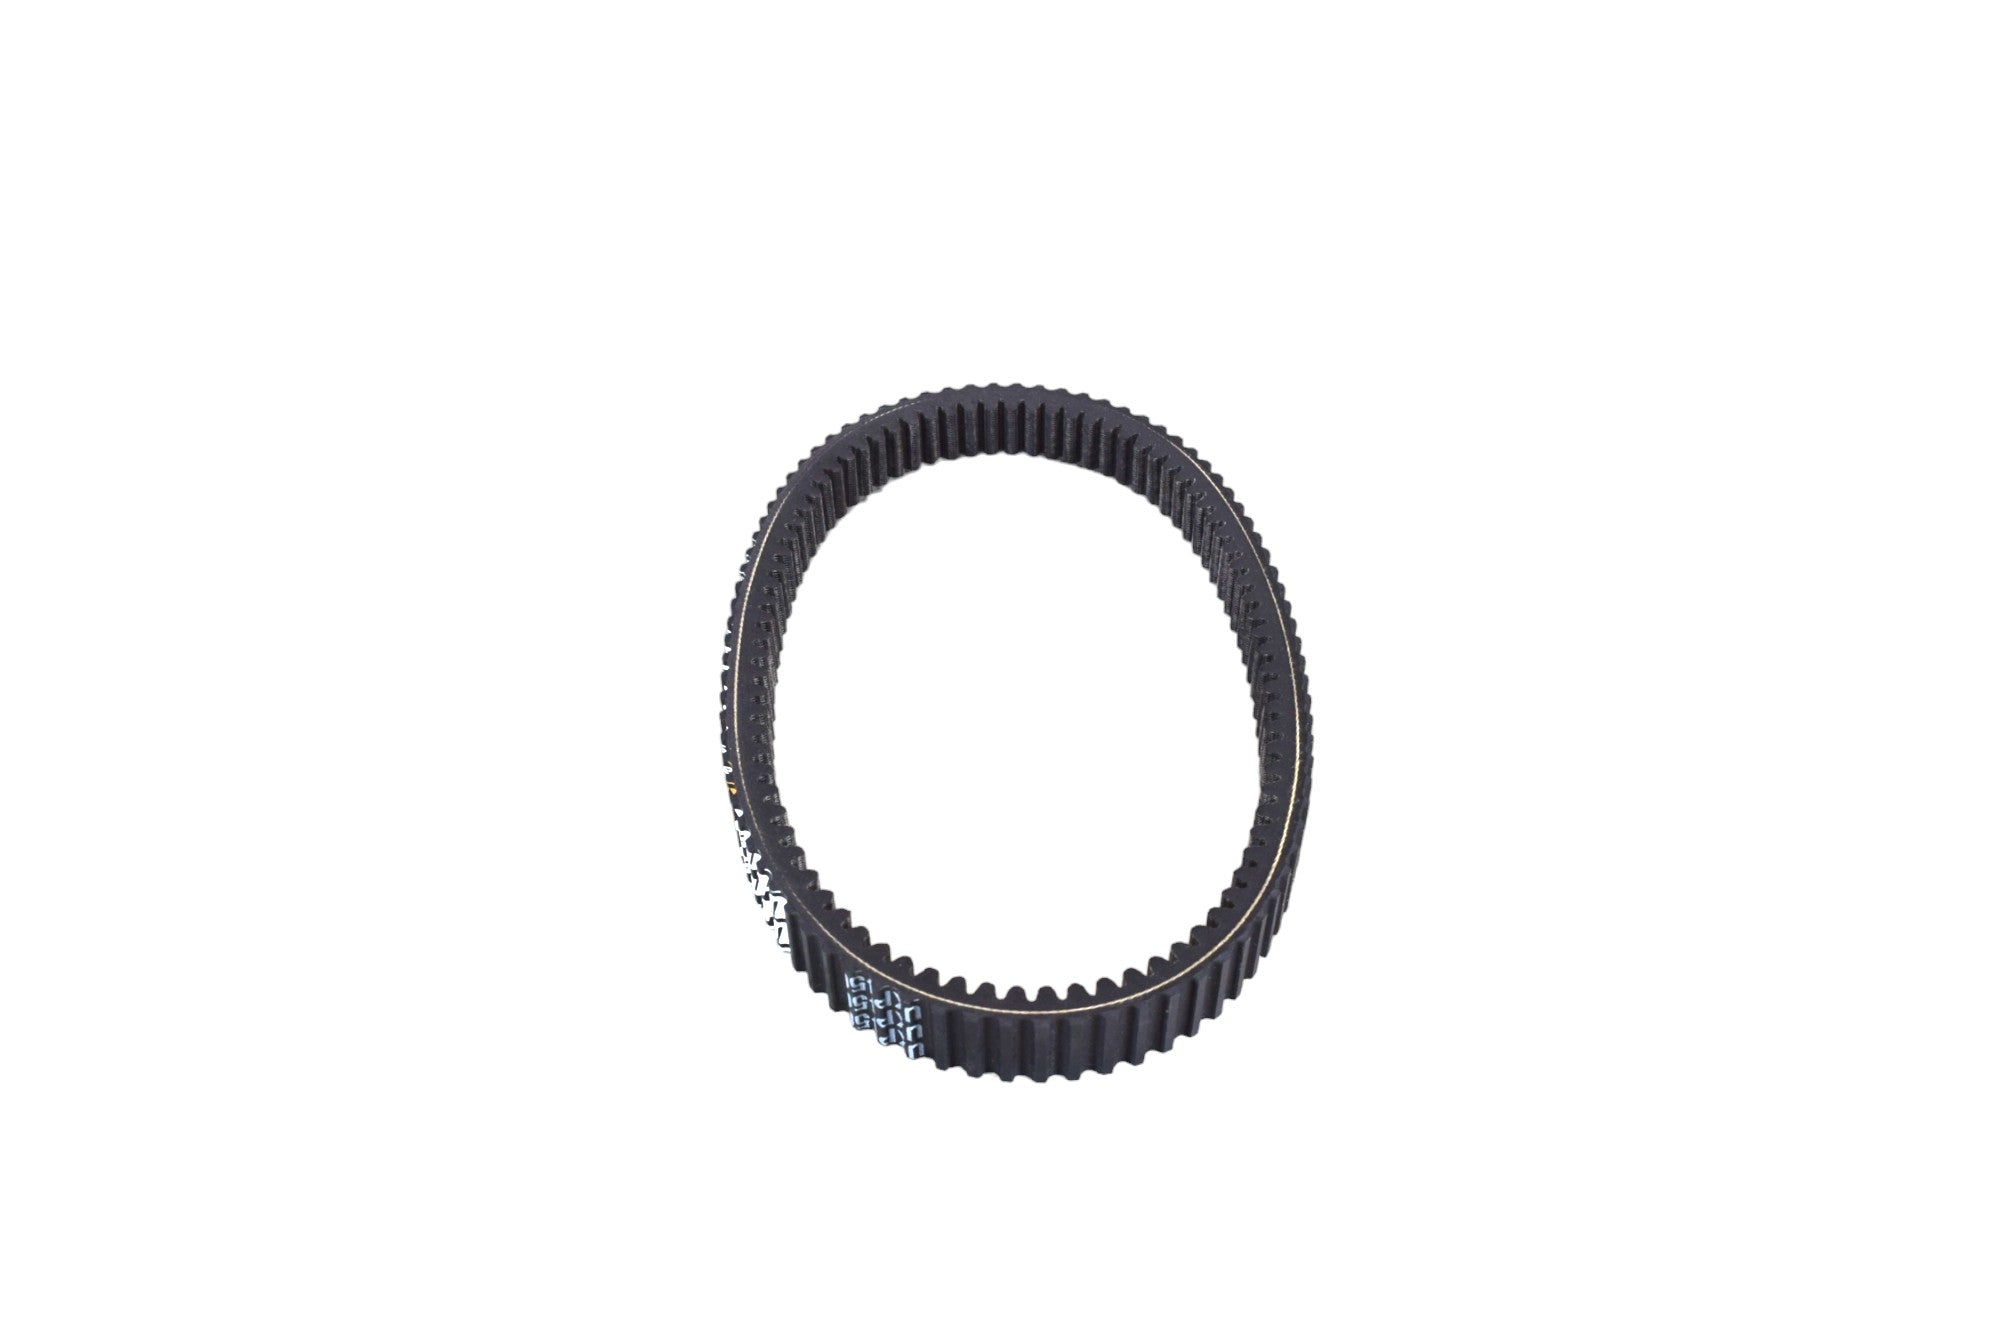 Ultimax UXP450 Drive Belt for Kawasaki and Suzuki OEM Replacement for 59011-0003, 59011-0019, 59011-1080, 59011-1084, K5901-10003 (Made in USA)